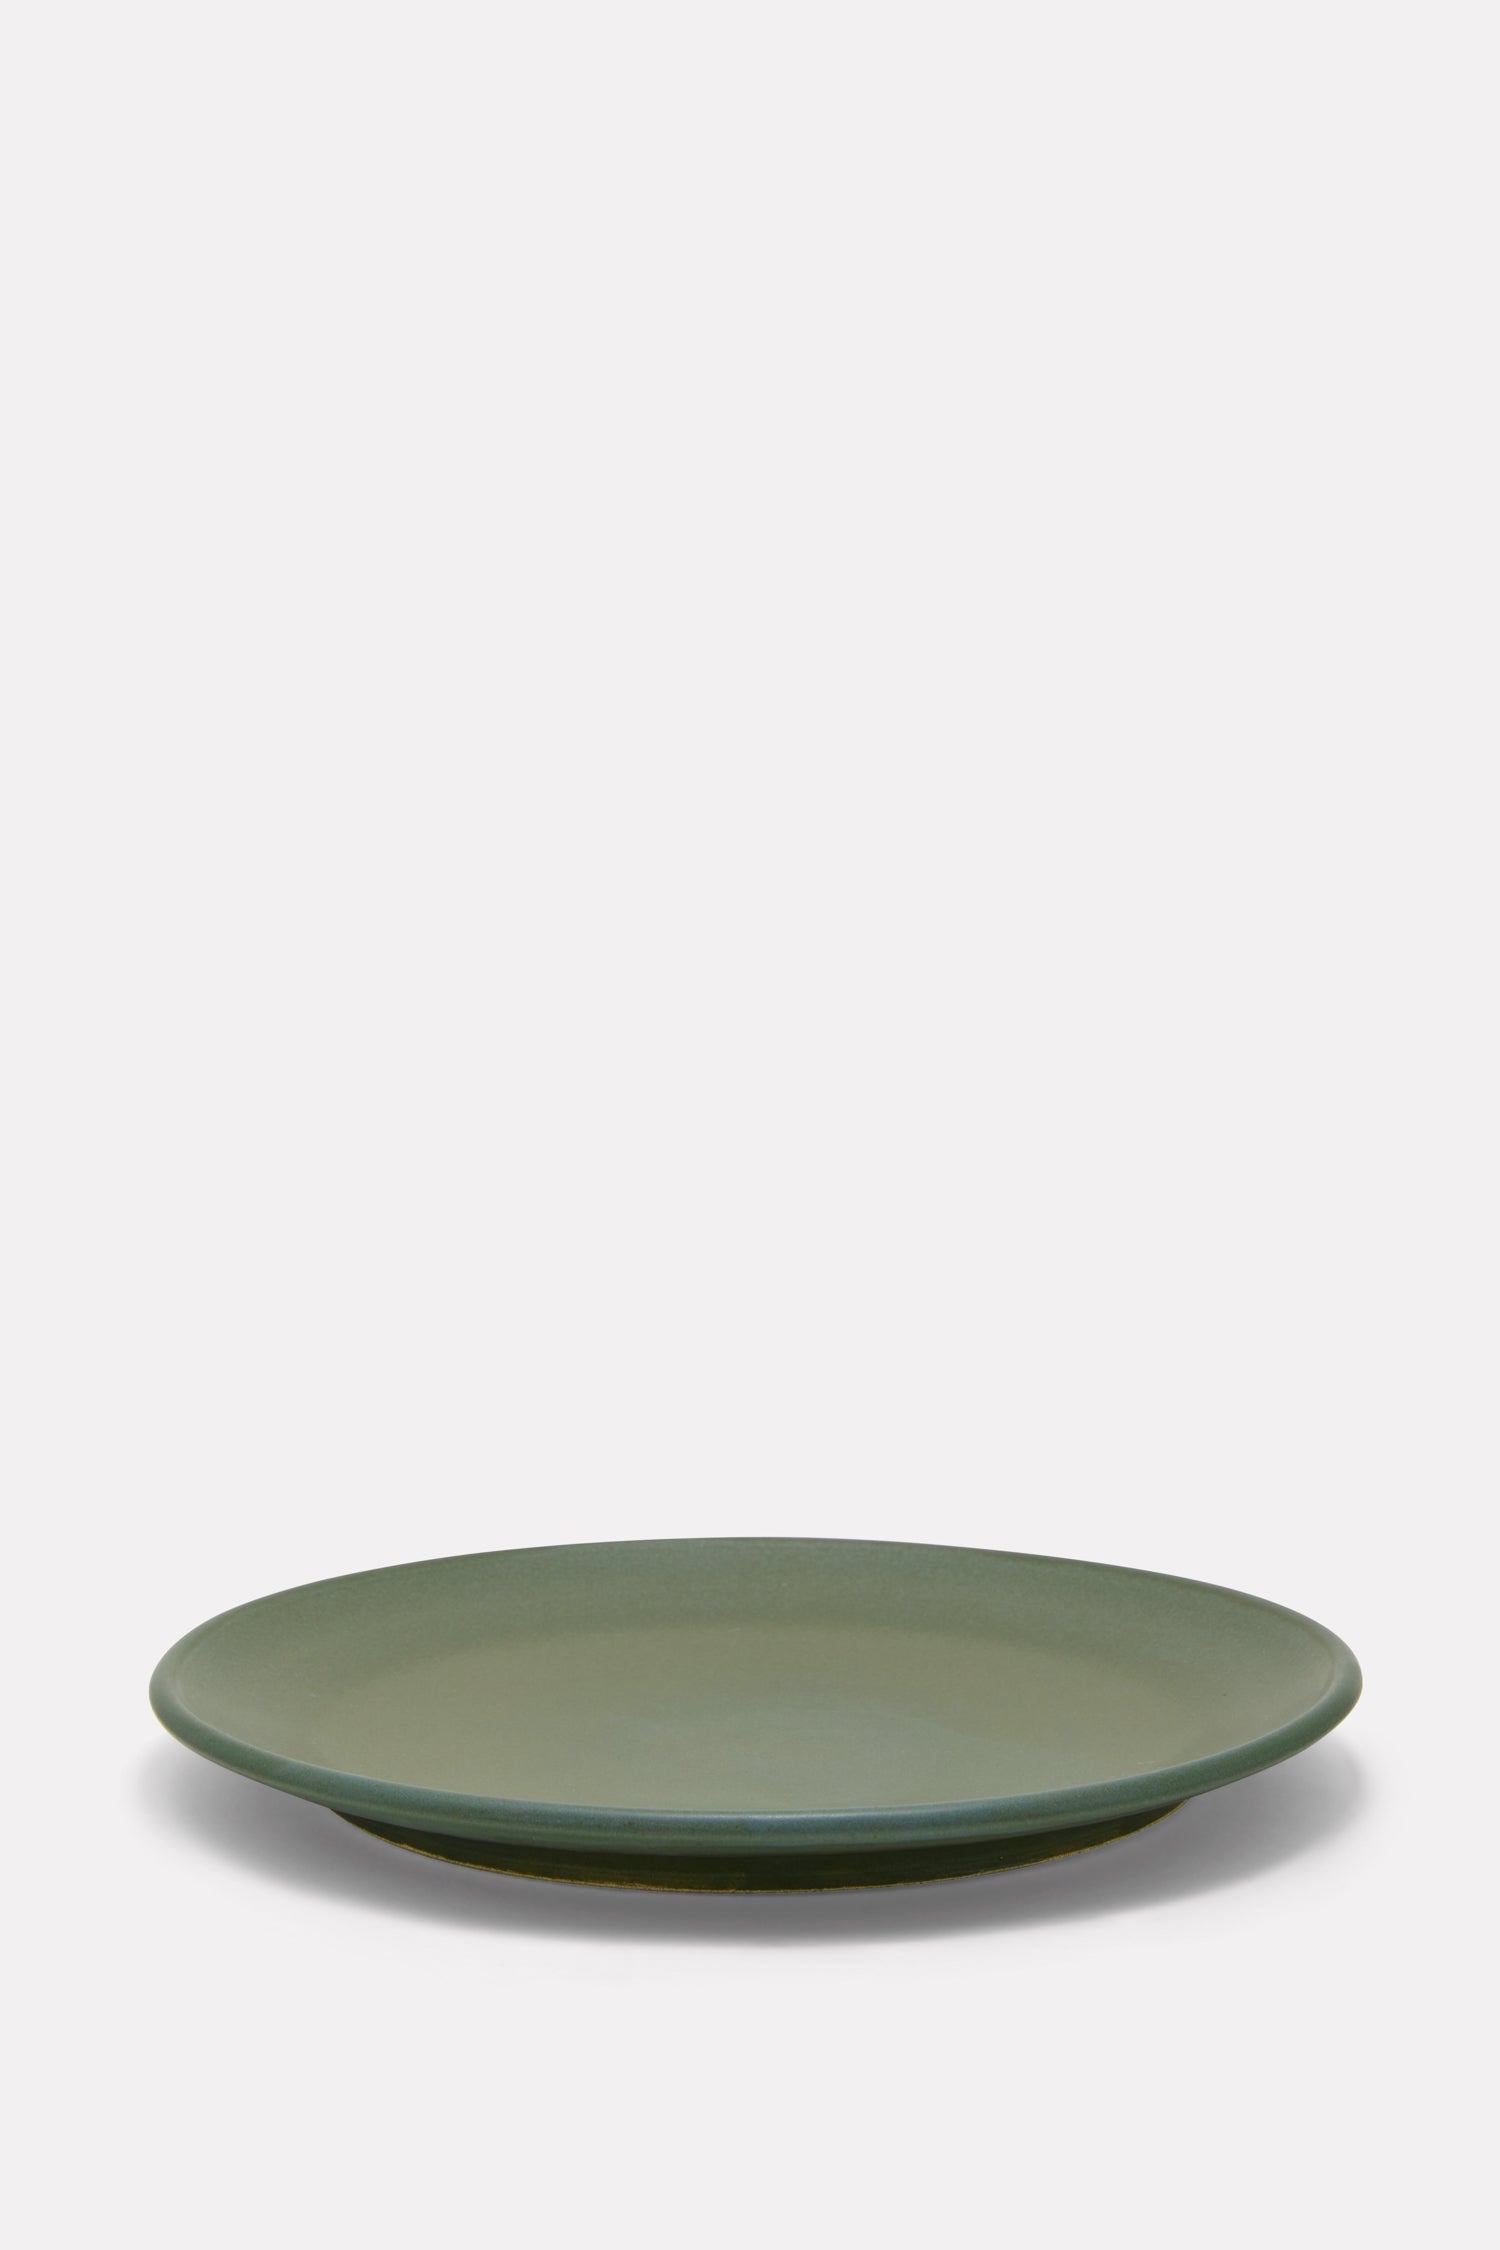 Touch of Color Dinner Plate, Square, 9 inch, Emerald Green, 18 Ct